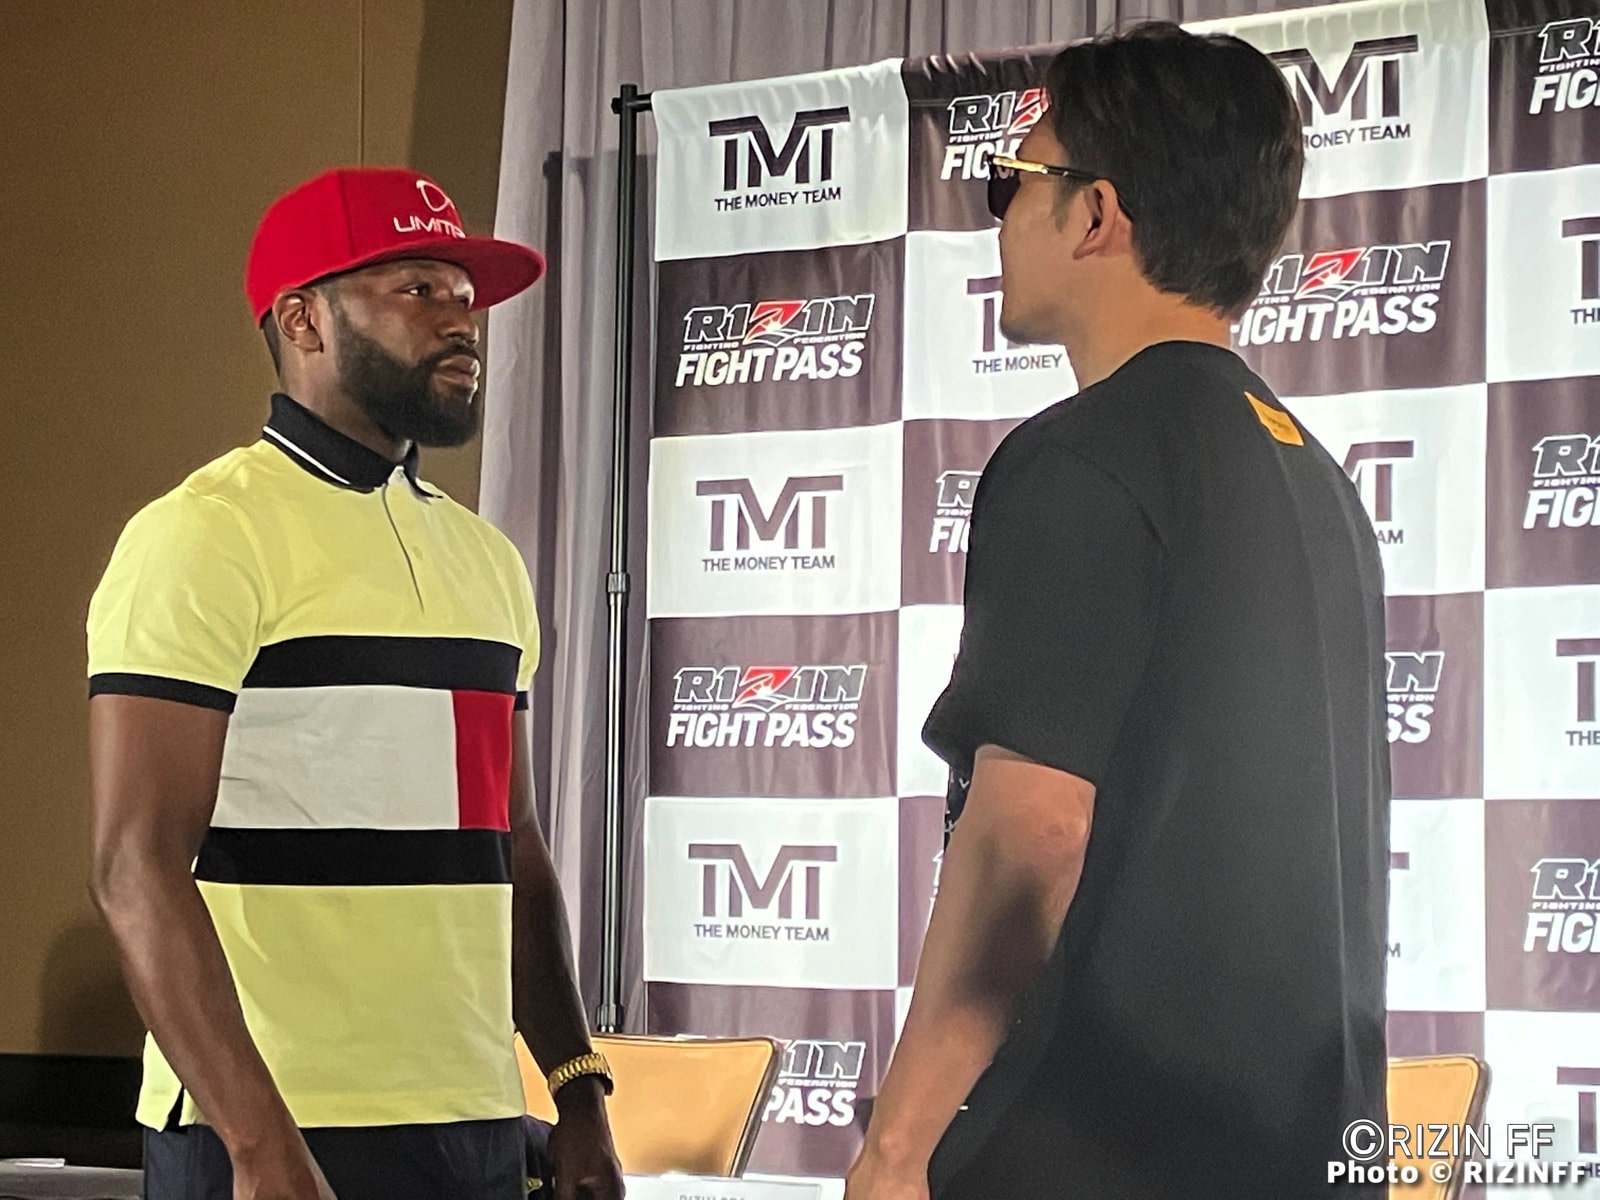 Image: Floyd Mayweather to fight Mikuru Asakura in an exhibition event in September